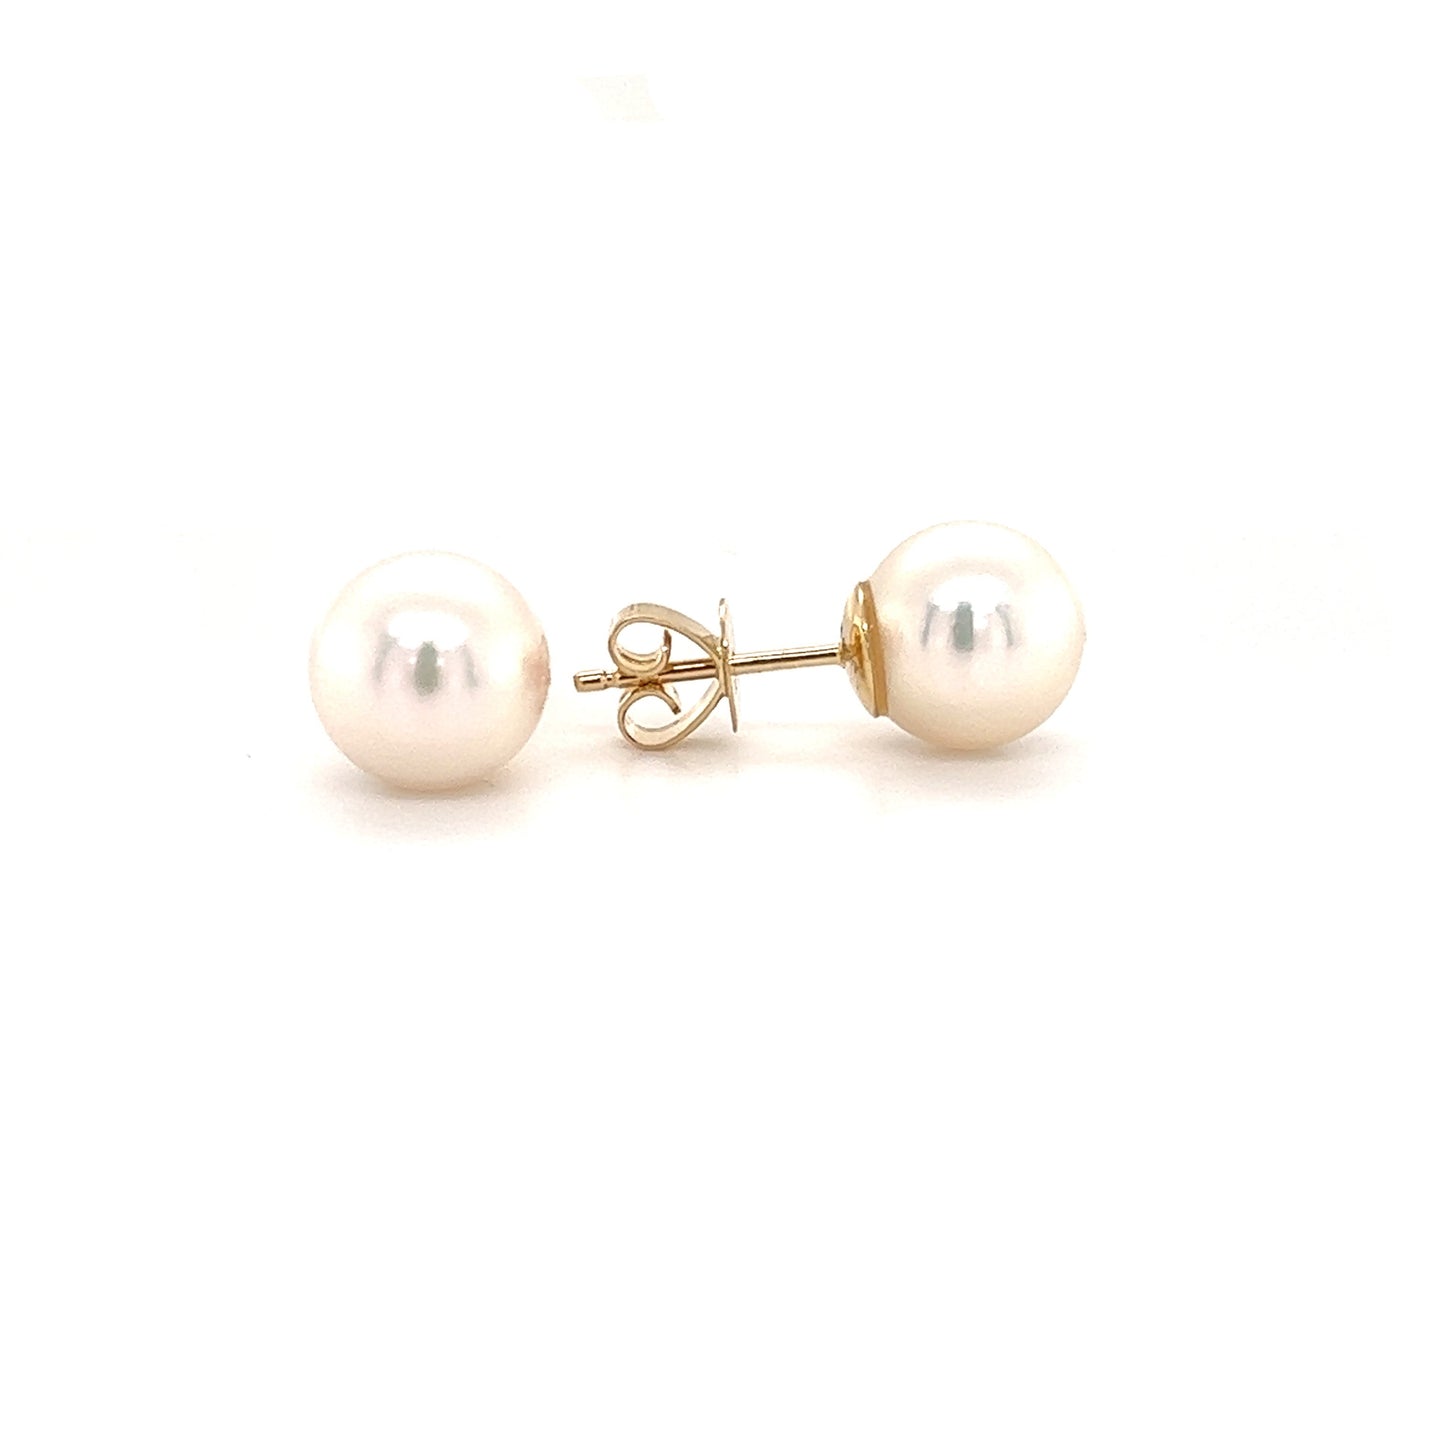 Pearl 8mm Stud Earrings in 14K Yellow Gold Front and Side View